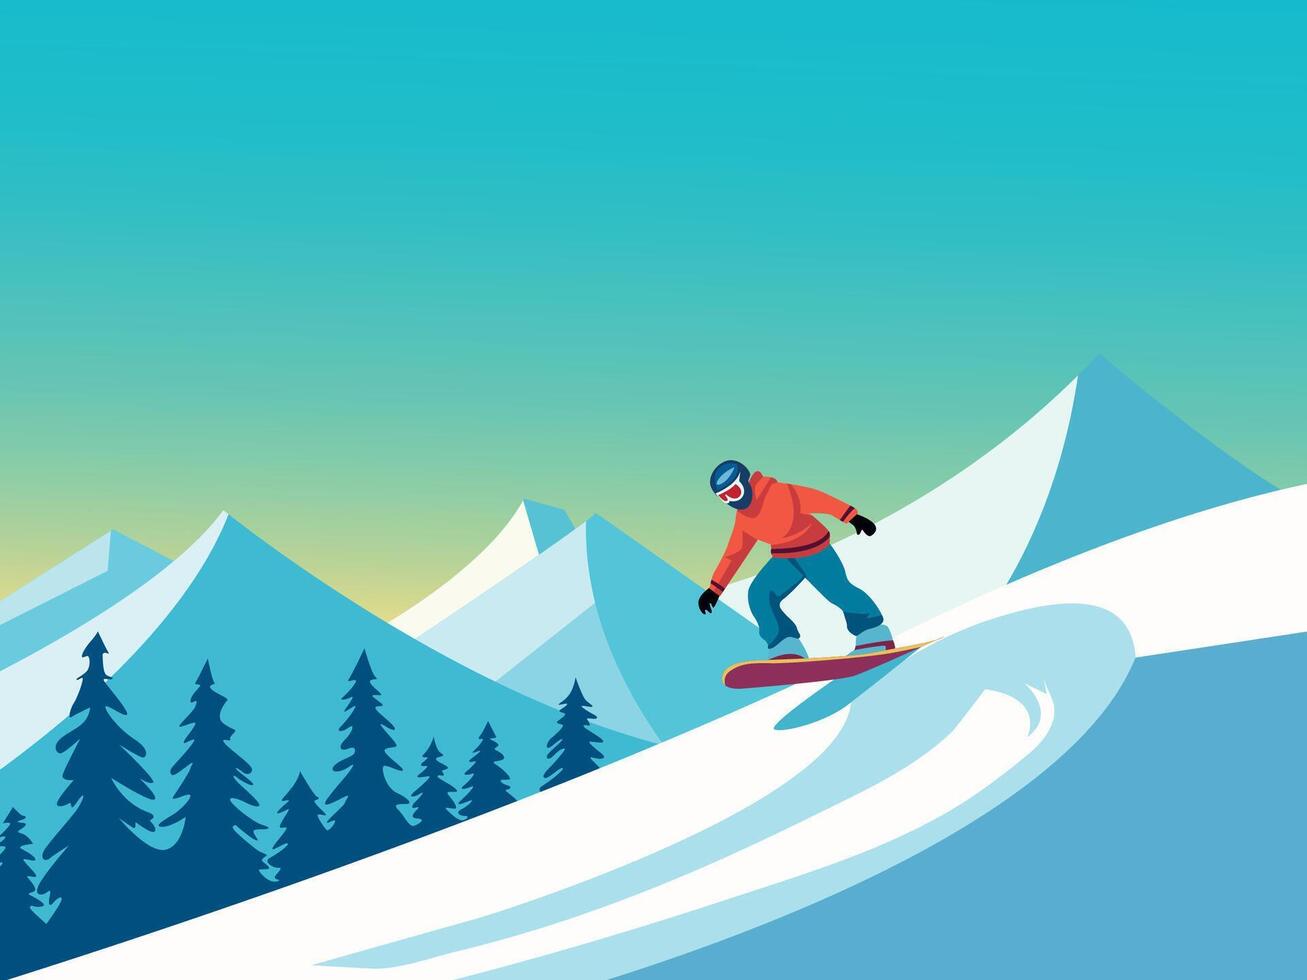 snowboarding in the mountains vector landscape illustration